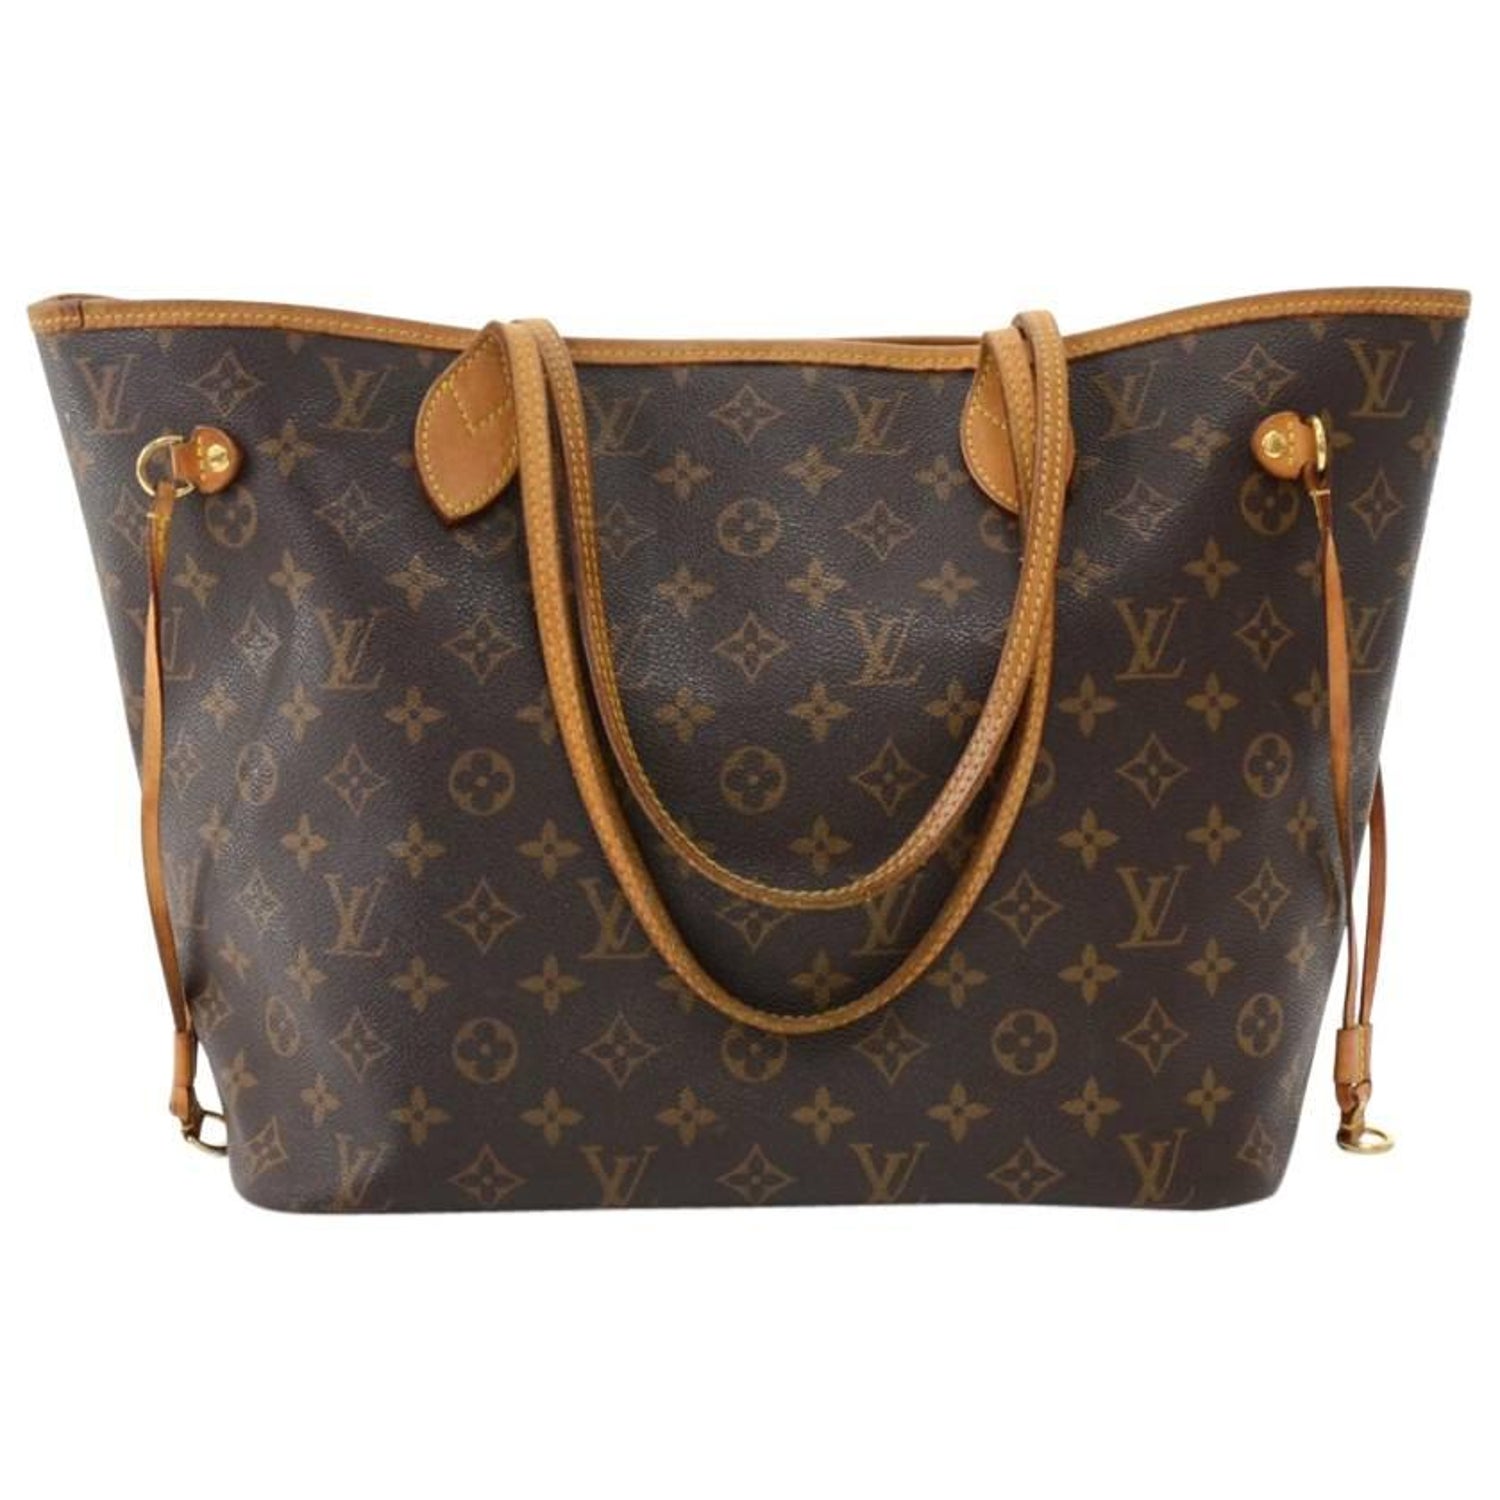 Black Friday Sale: Pre-Owned Louis Vuitton Neverfull Bags